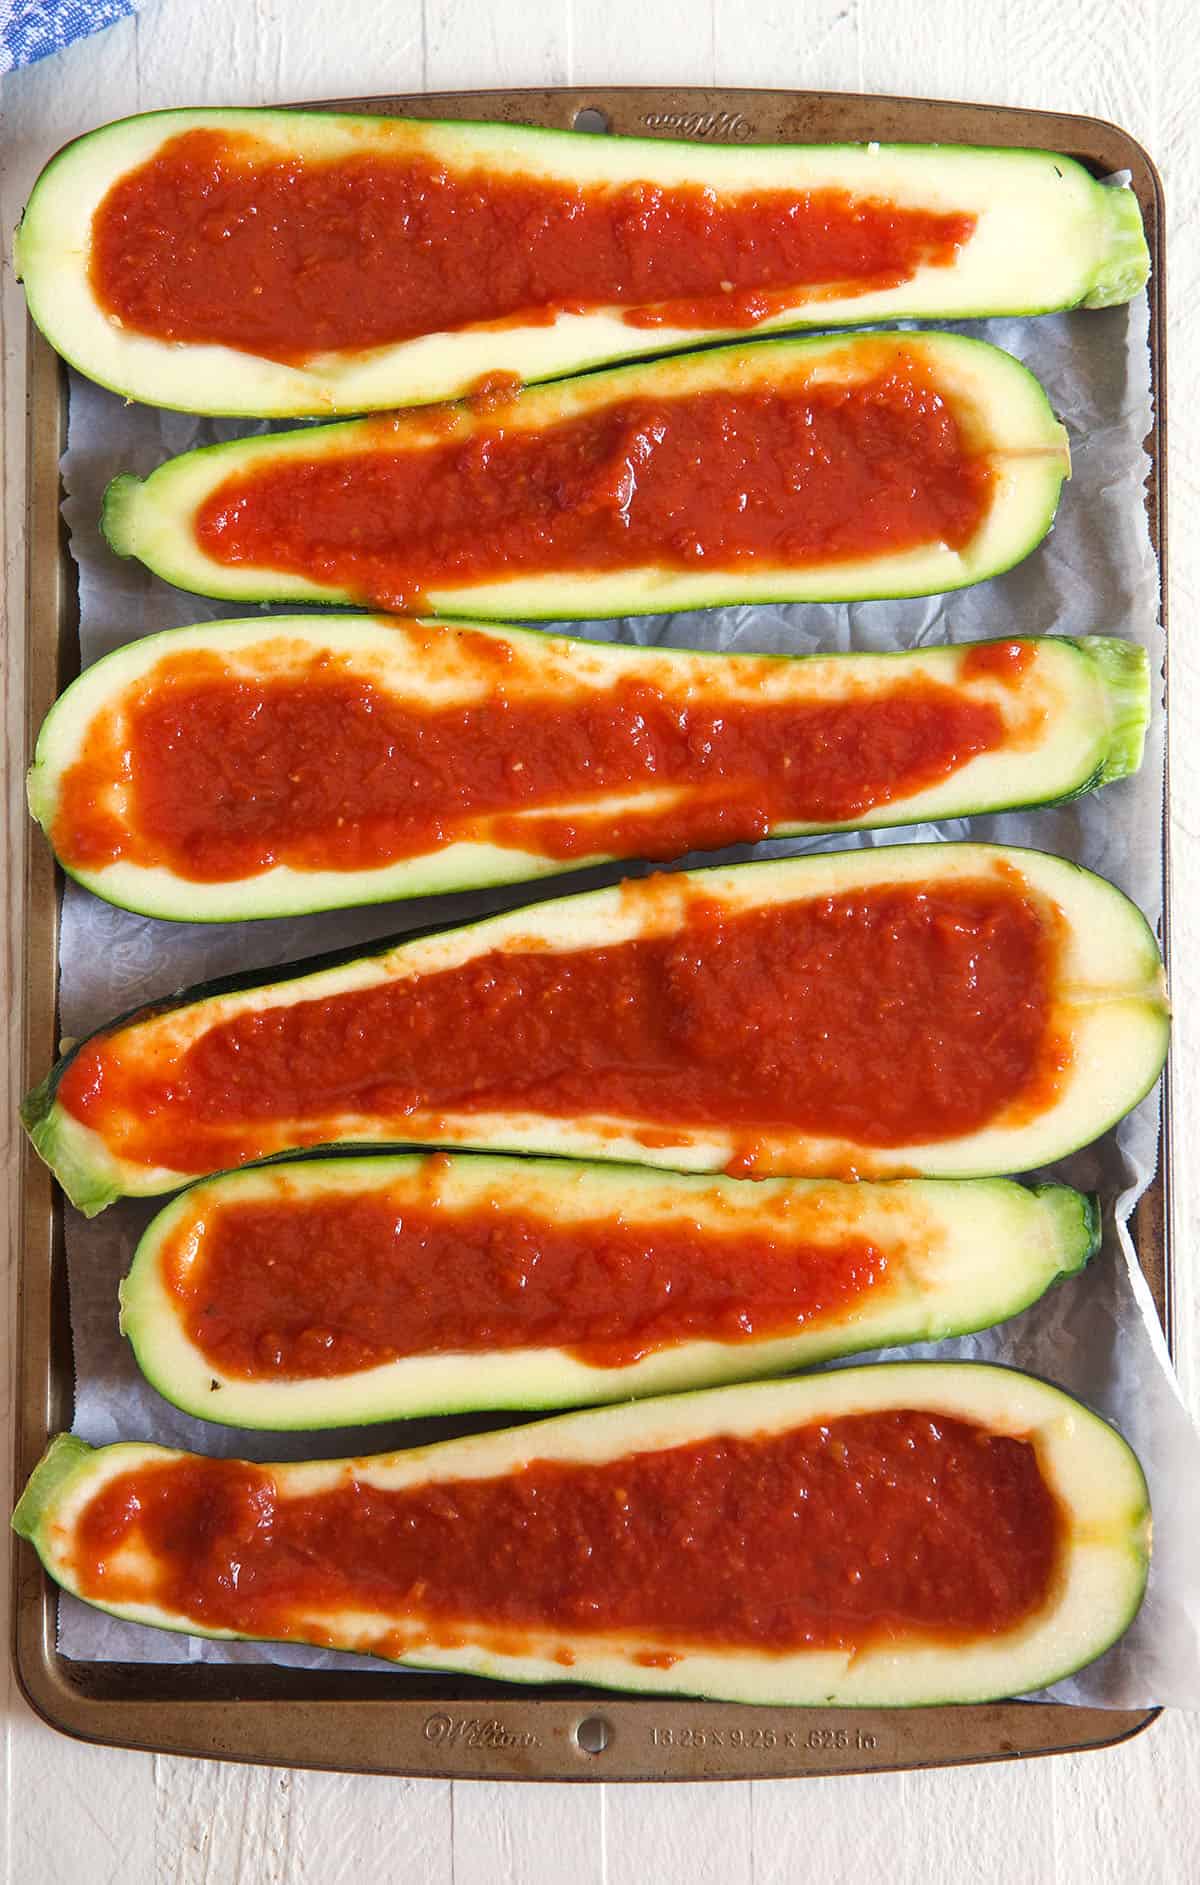 Several sliced zucchini boats are filled with red pizza sauce.